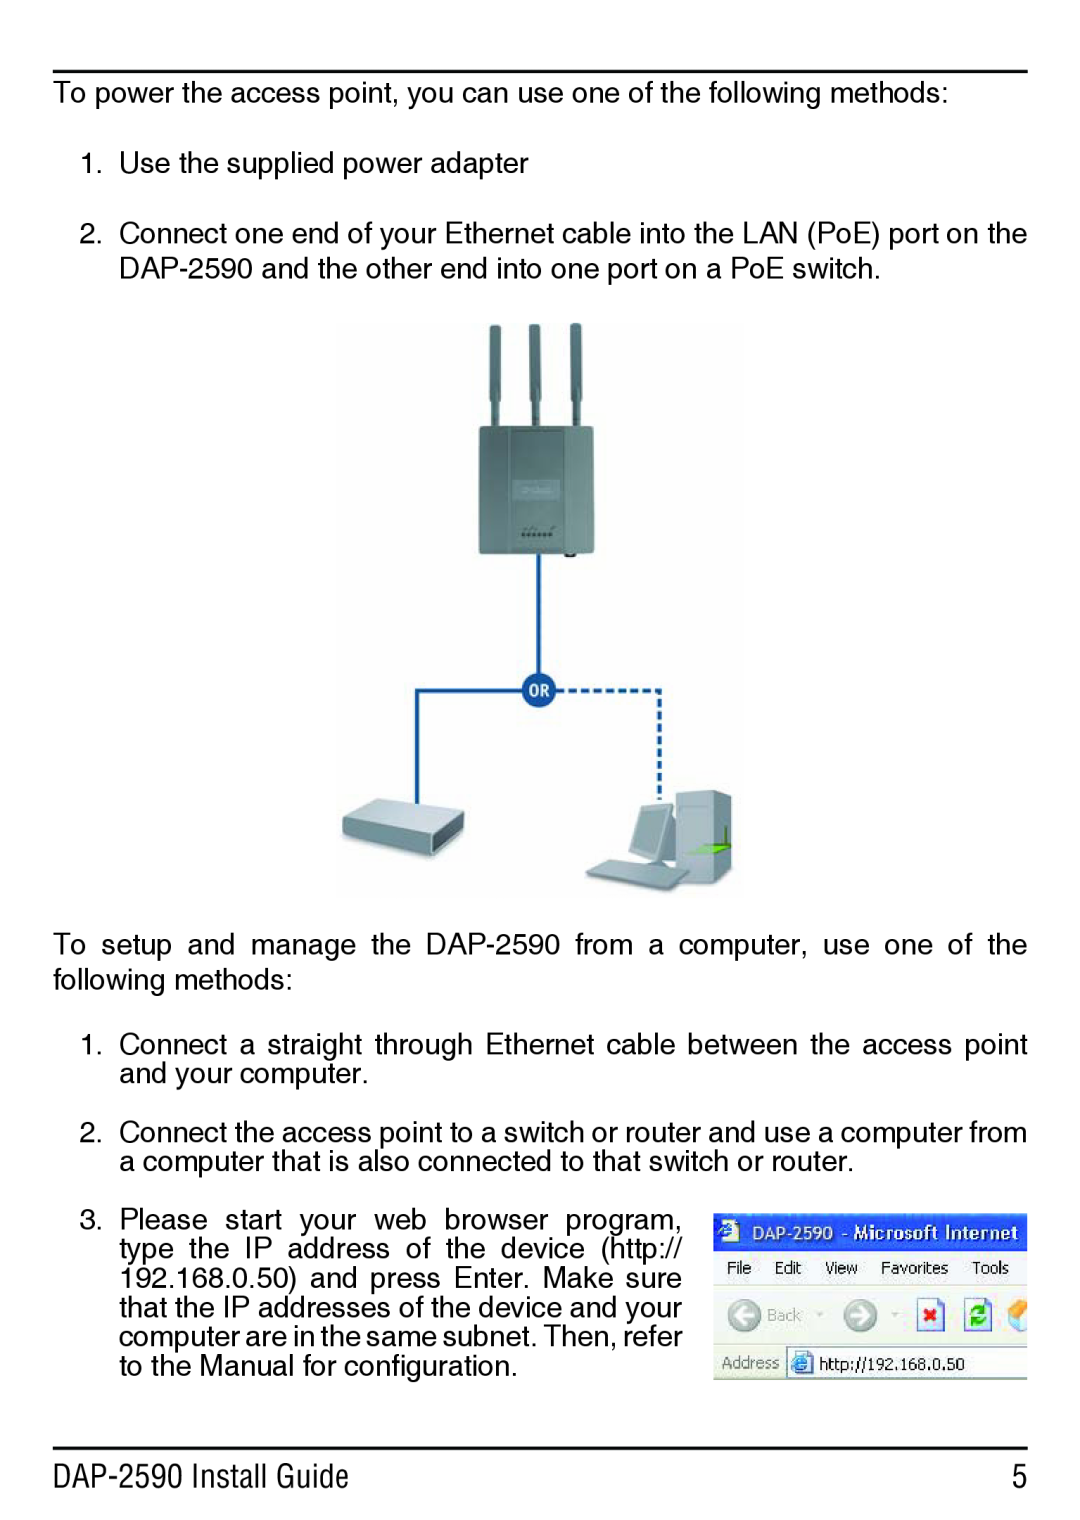 D-Link manual DAP-2590 Install Guide, To power the access point, you can use one of the following methods 